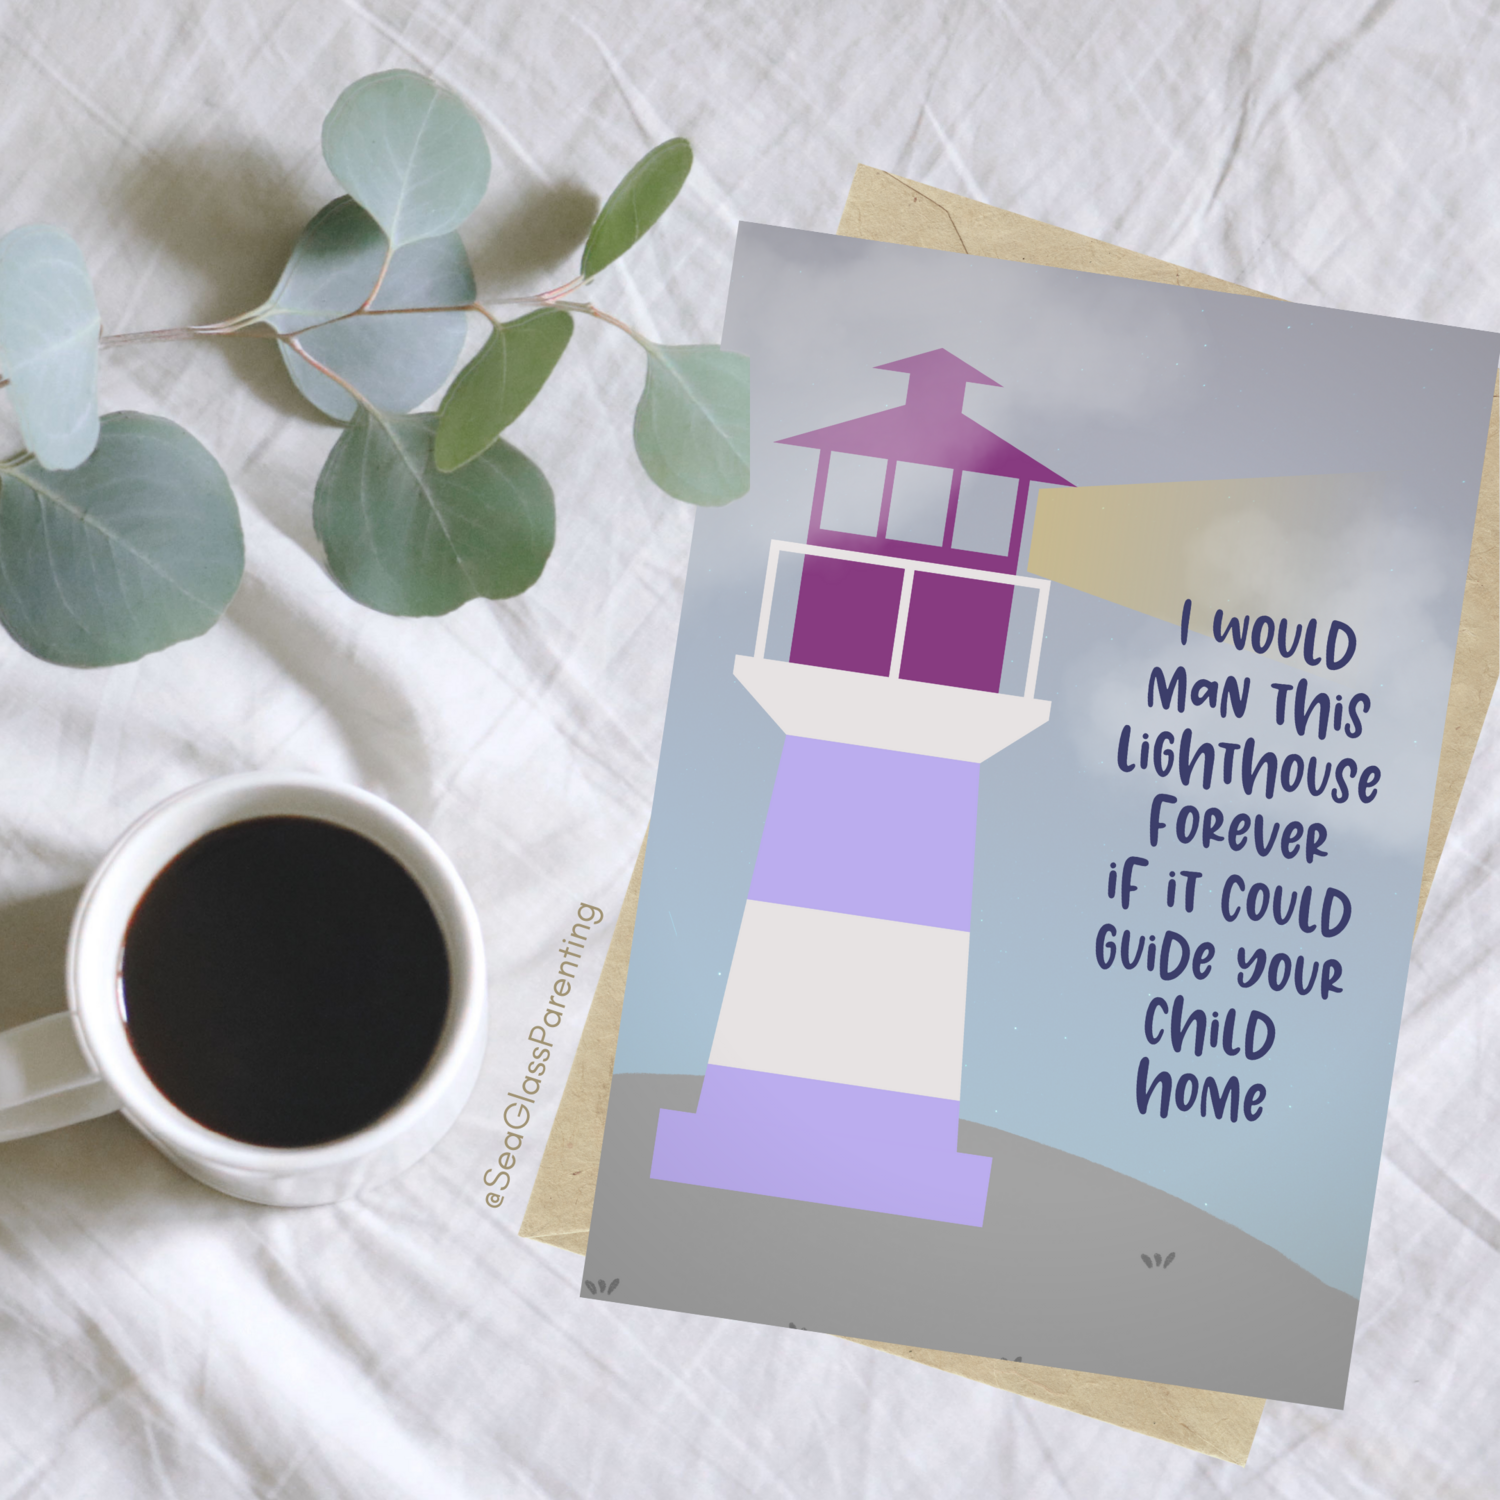 I would Man this Lighthouse Forever if it Could Guide Your Child Home—Baby loss sympathy & remembrance (greeting card)